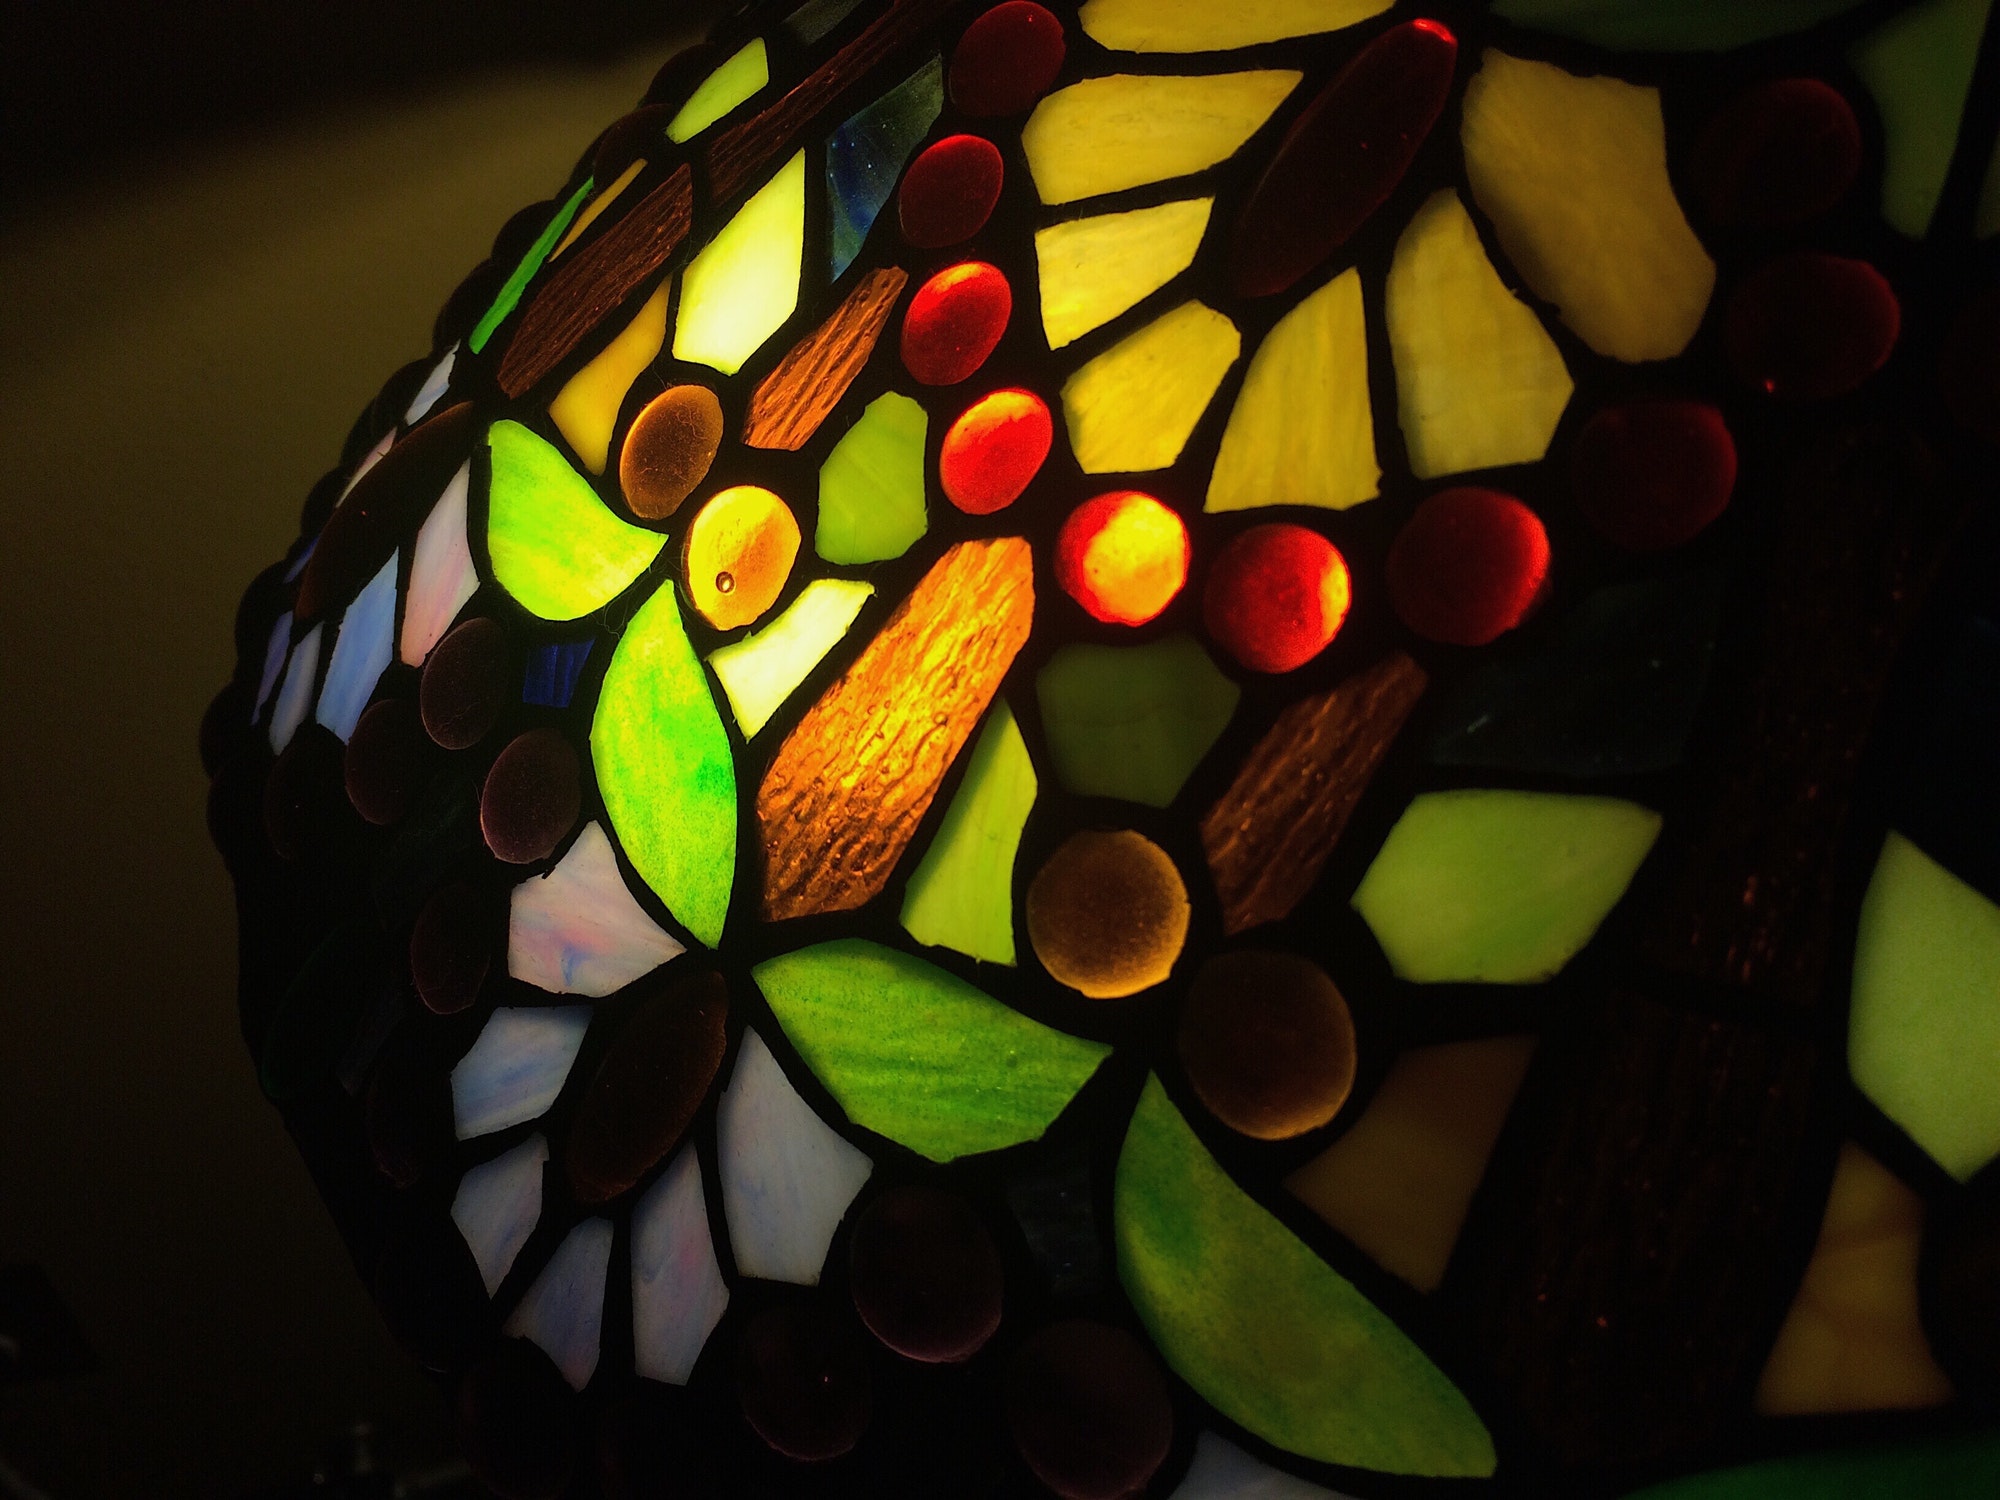 Lamp with colorful stained glass